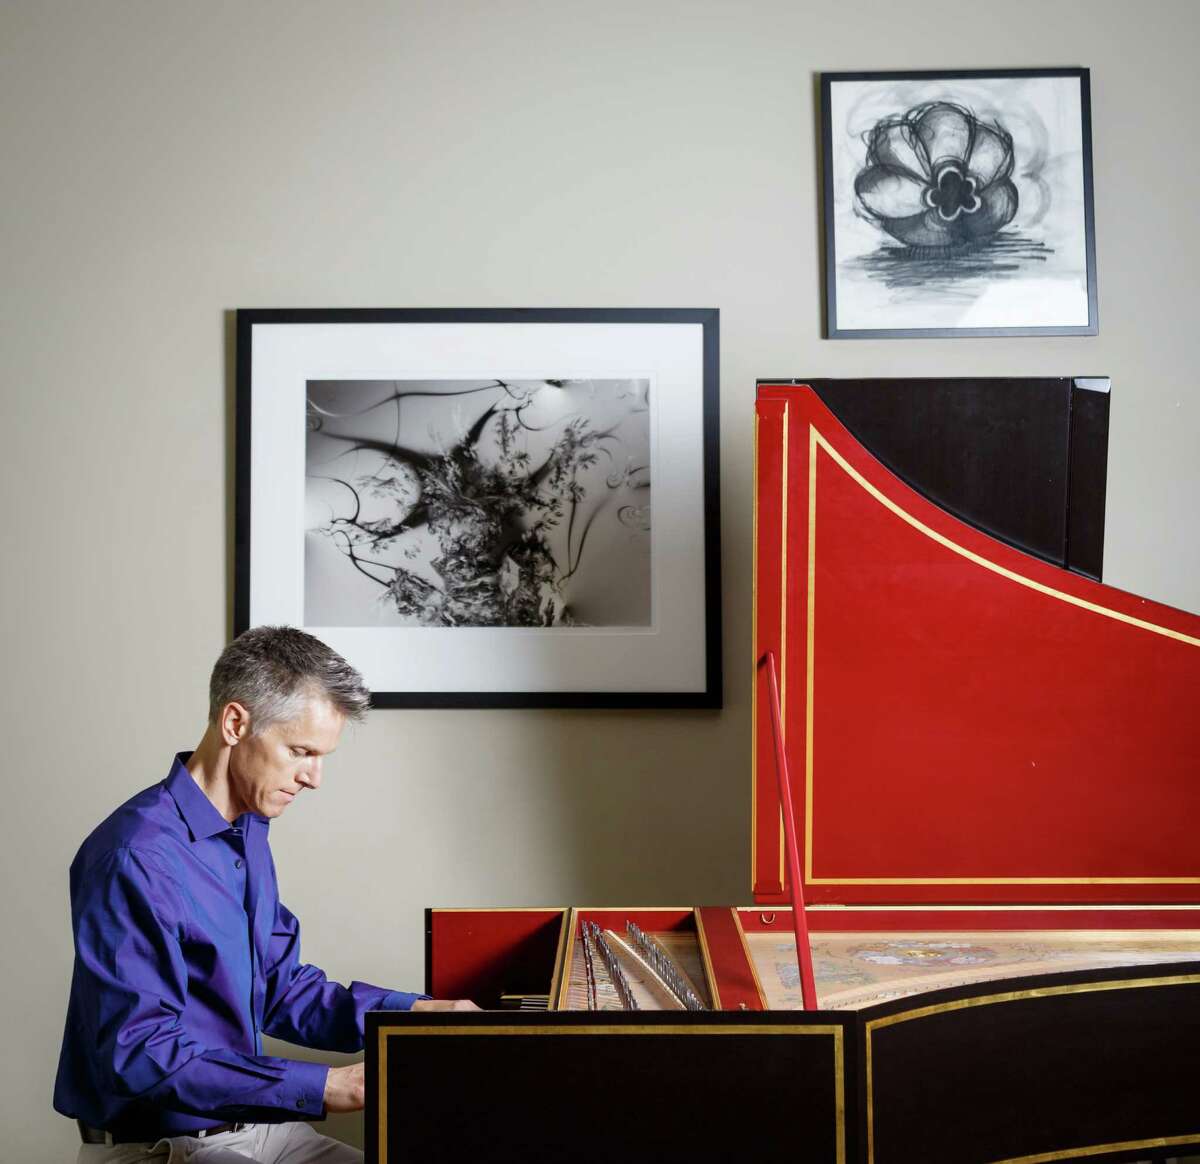 Matthew Dirst poses for a photo with his harpsichord at his home, Wednesday, Aug. 21, 2013, in Houston. Dirst is an organist, harpsichordist, University of Houston music professor and founder of the Ars Lyrica early music group. ( Michael Paulsen / Houston Chronicle )